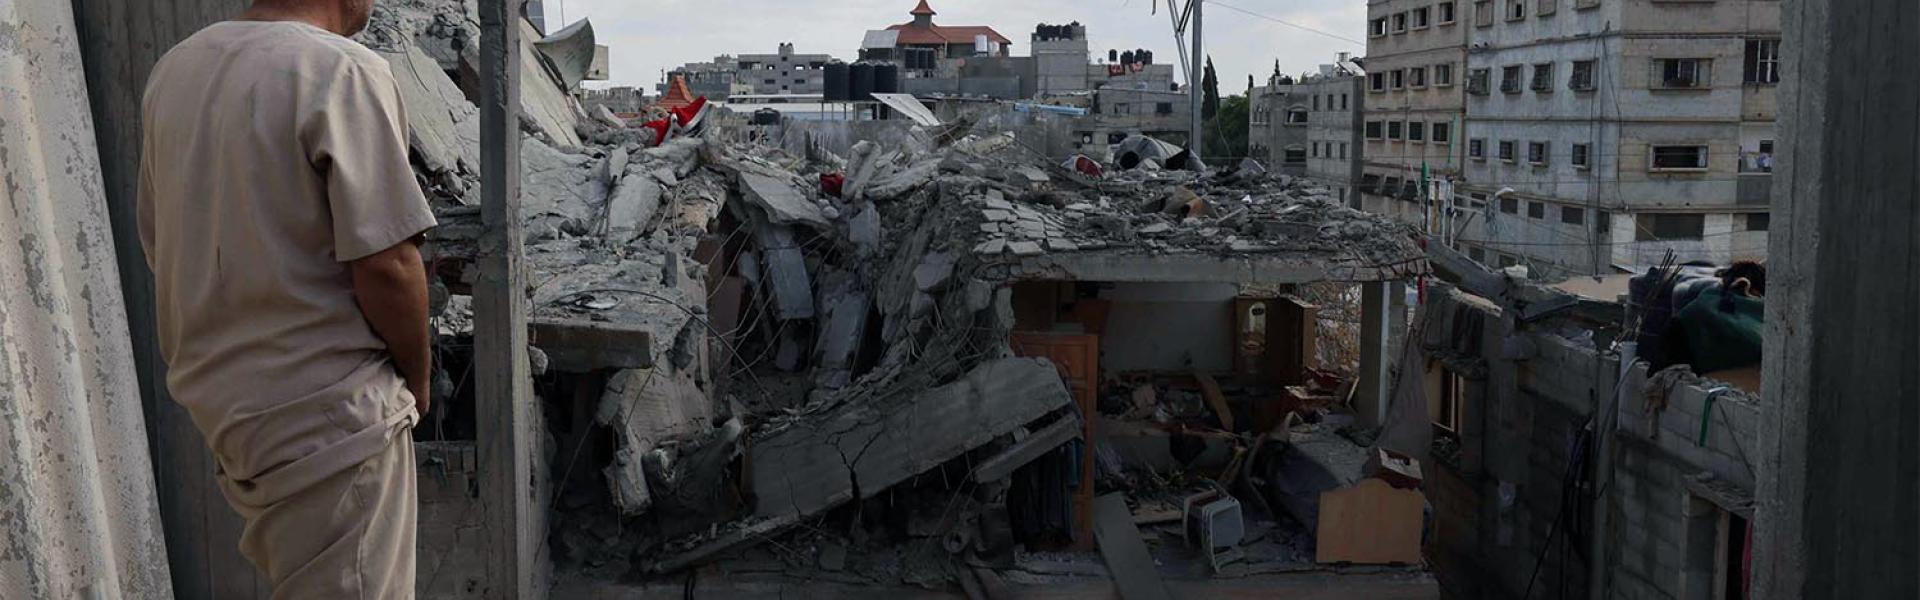 In the meantime, Israeli airstrikes continue to claim more lives and destroy houses